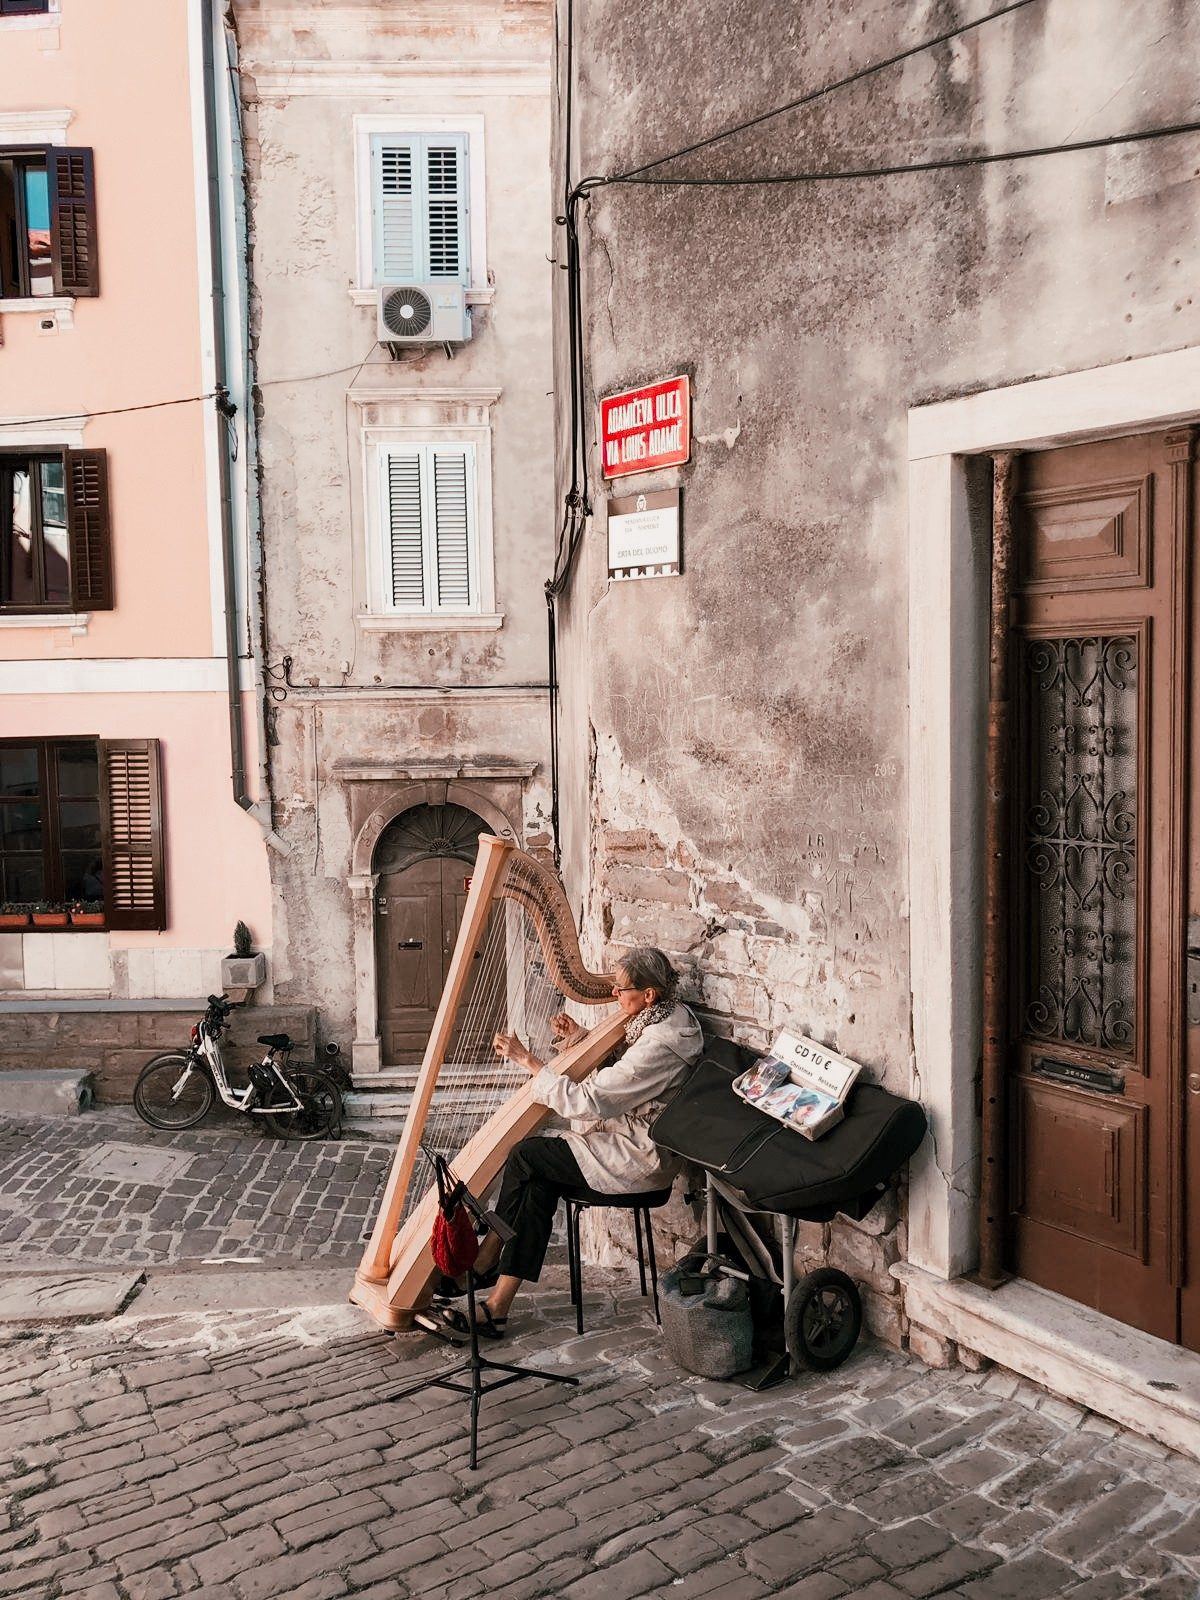 Things to do in Piran, Slovenia